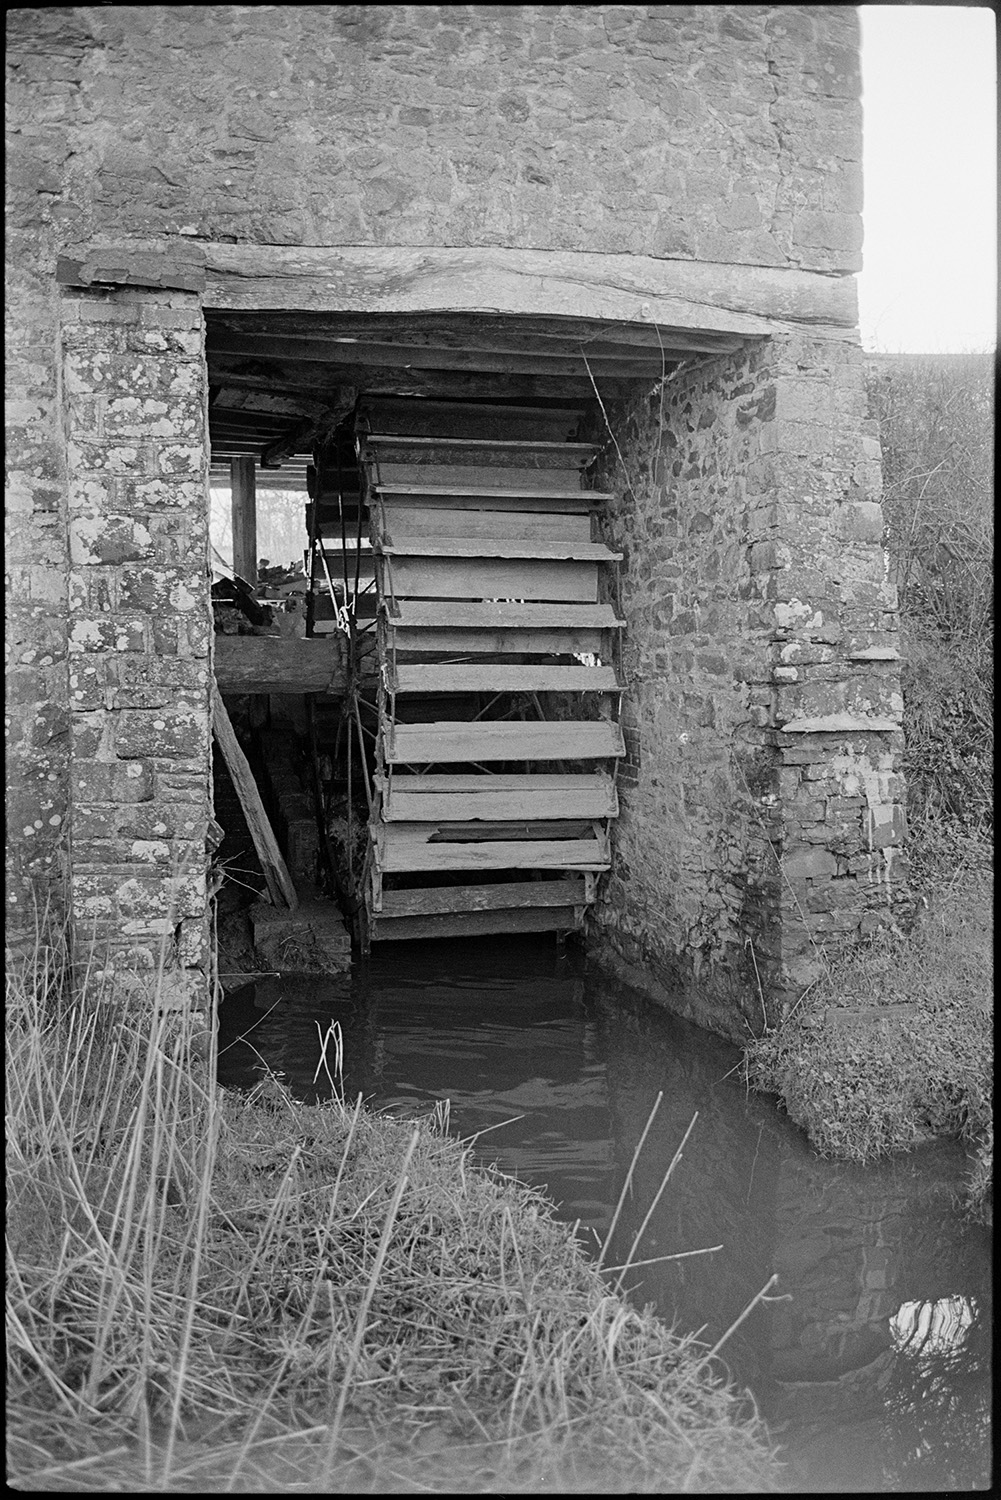 Views inside and outside of mill showing wheel and machinery and workshop. Stored nitches thatch.<br />
[The wooden water wheel at Rashleigh Mill, Bridge Reeve.]